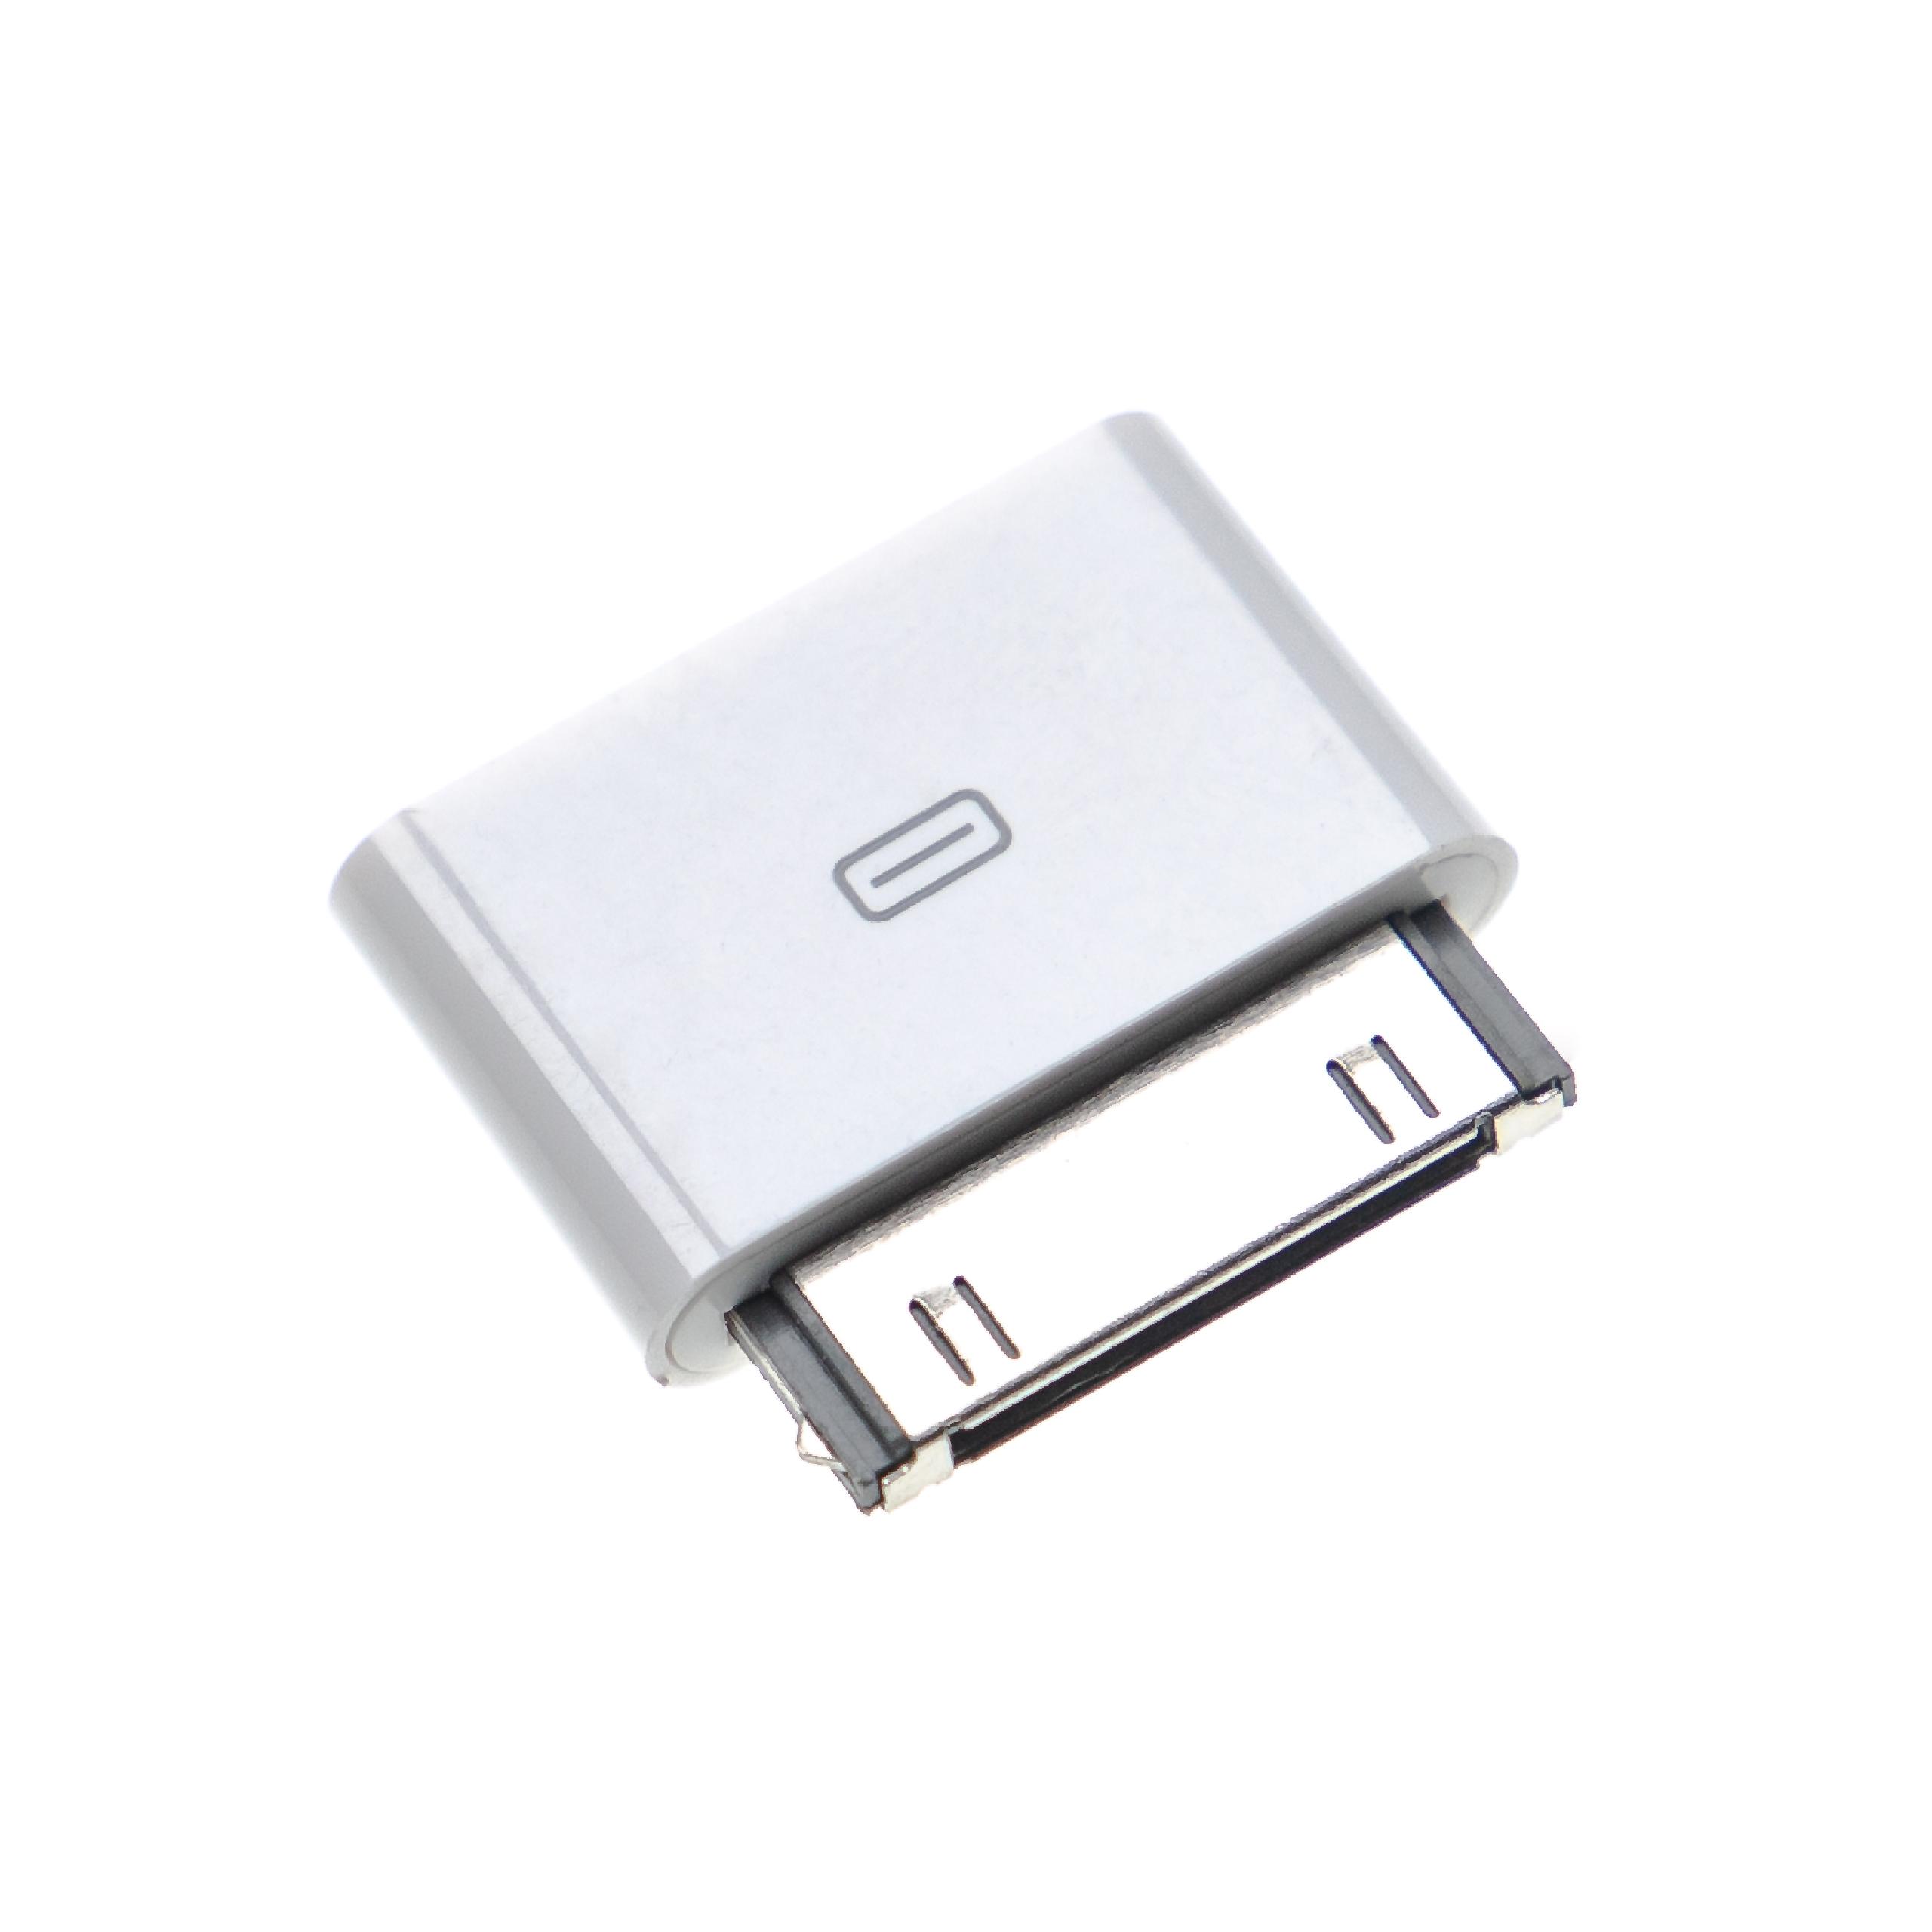 vhbw Adapter for Apple iPhone Handy, Smartphone - Cable Adapter from Micro USB to 30-pin Plug White